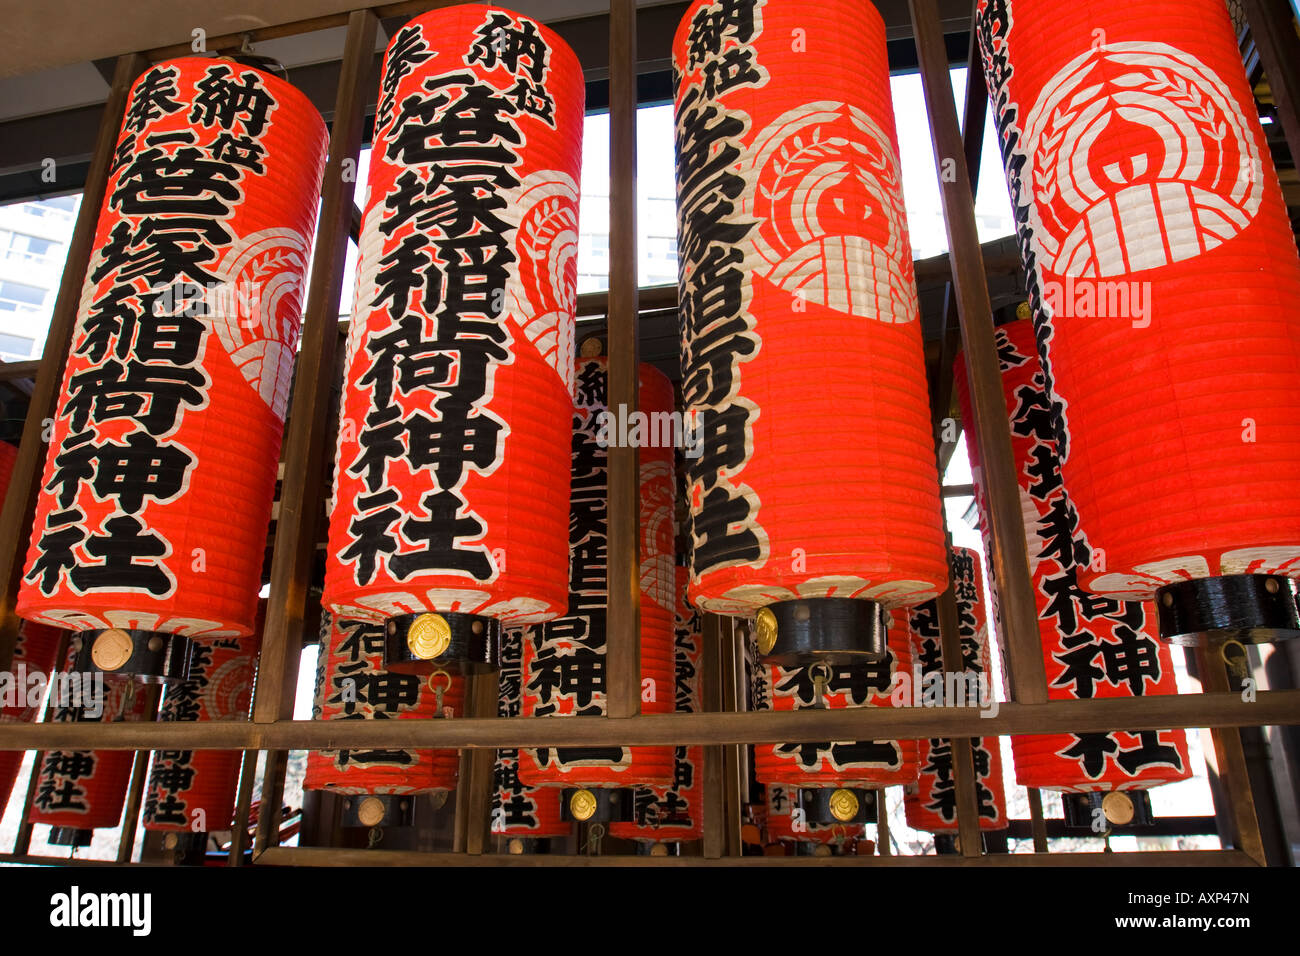 Rows of red paper lanterns with Japanese characters Stock Photo